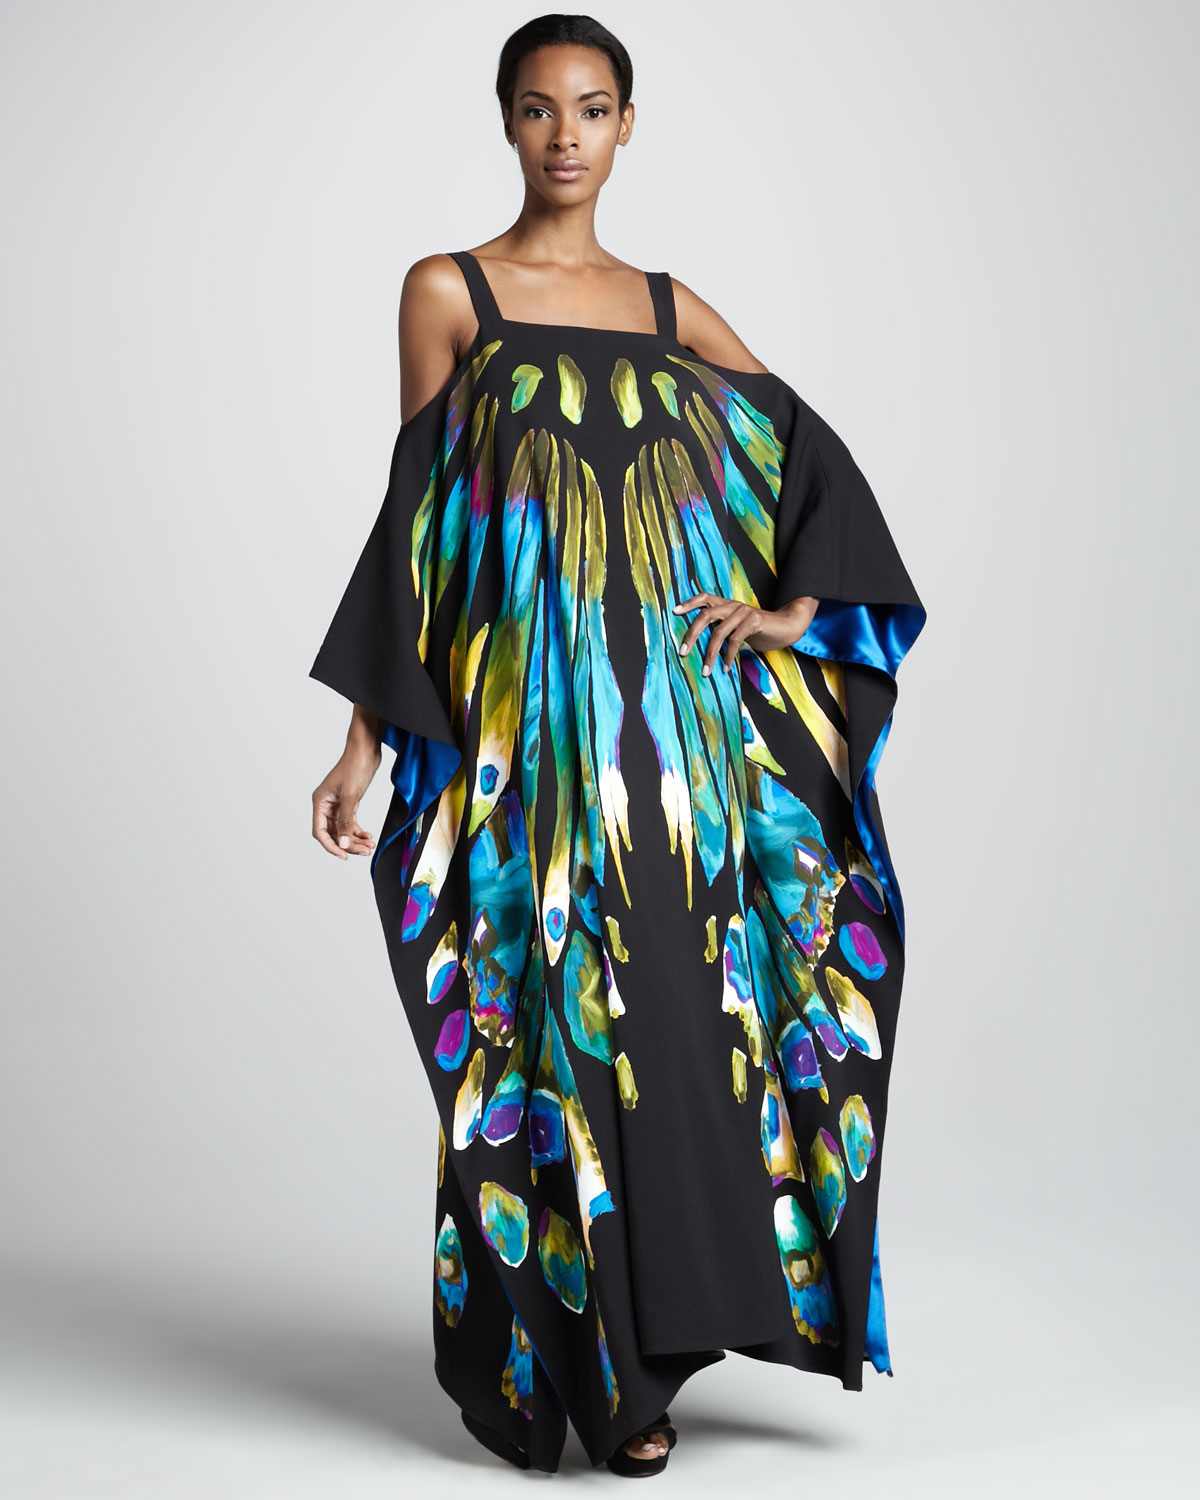 Lyst - Etro Coldshoulder Butterfly Caftan Gown in Black